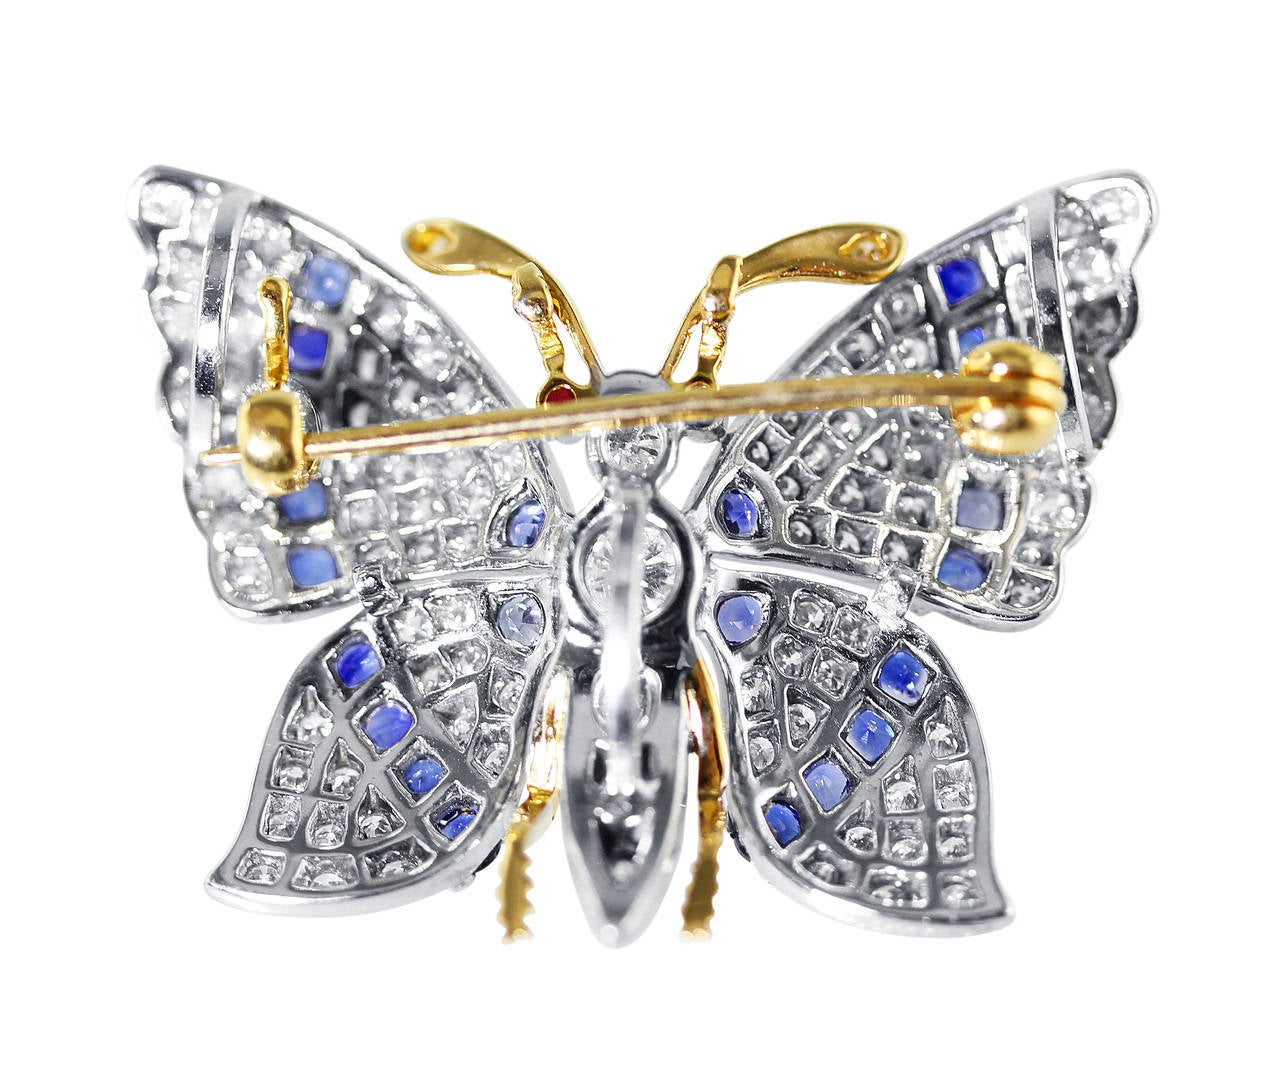 A whimsical 18 karat yellow gold, platinum, sapphire and diamond butterfly brooch, designed as a butterfly with wings extended set throughout with 101 round diamonds weighing approximately 1.50 carats, and 22 round blue sapphires weighing